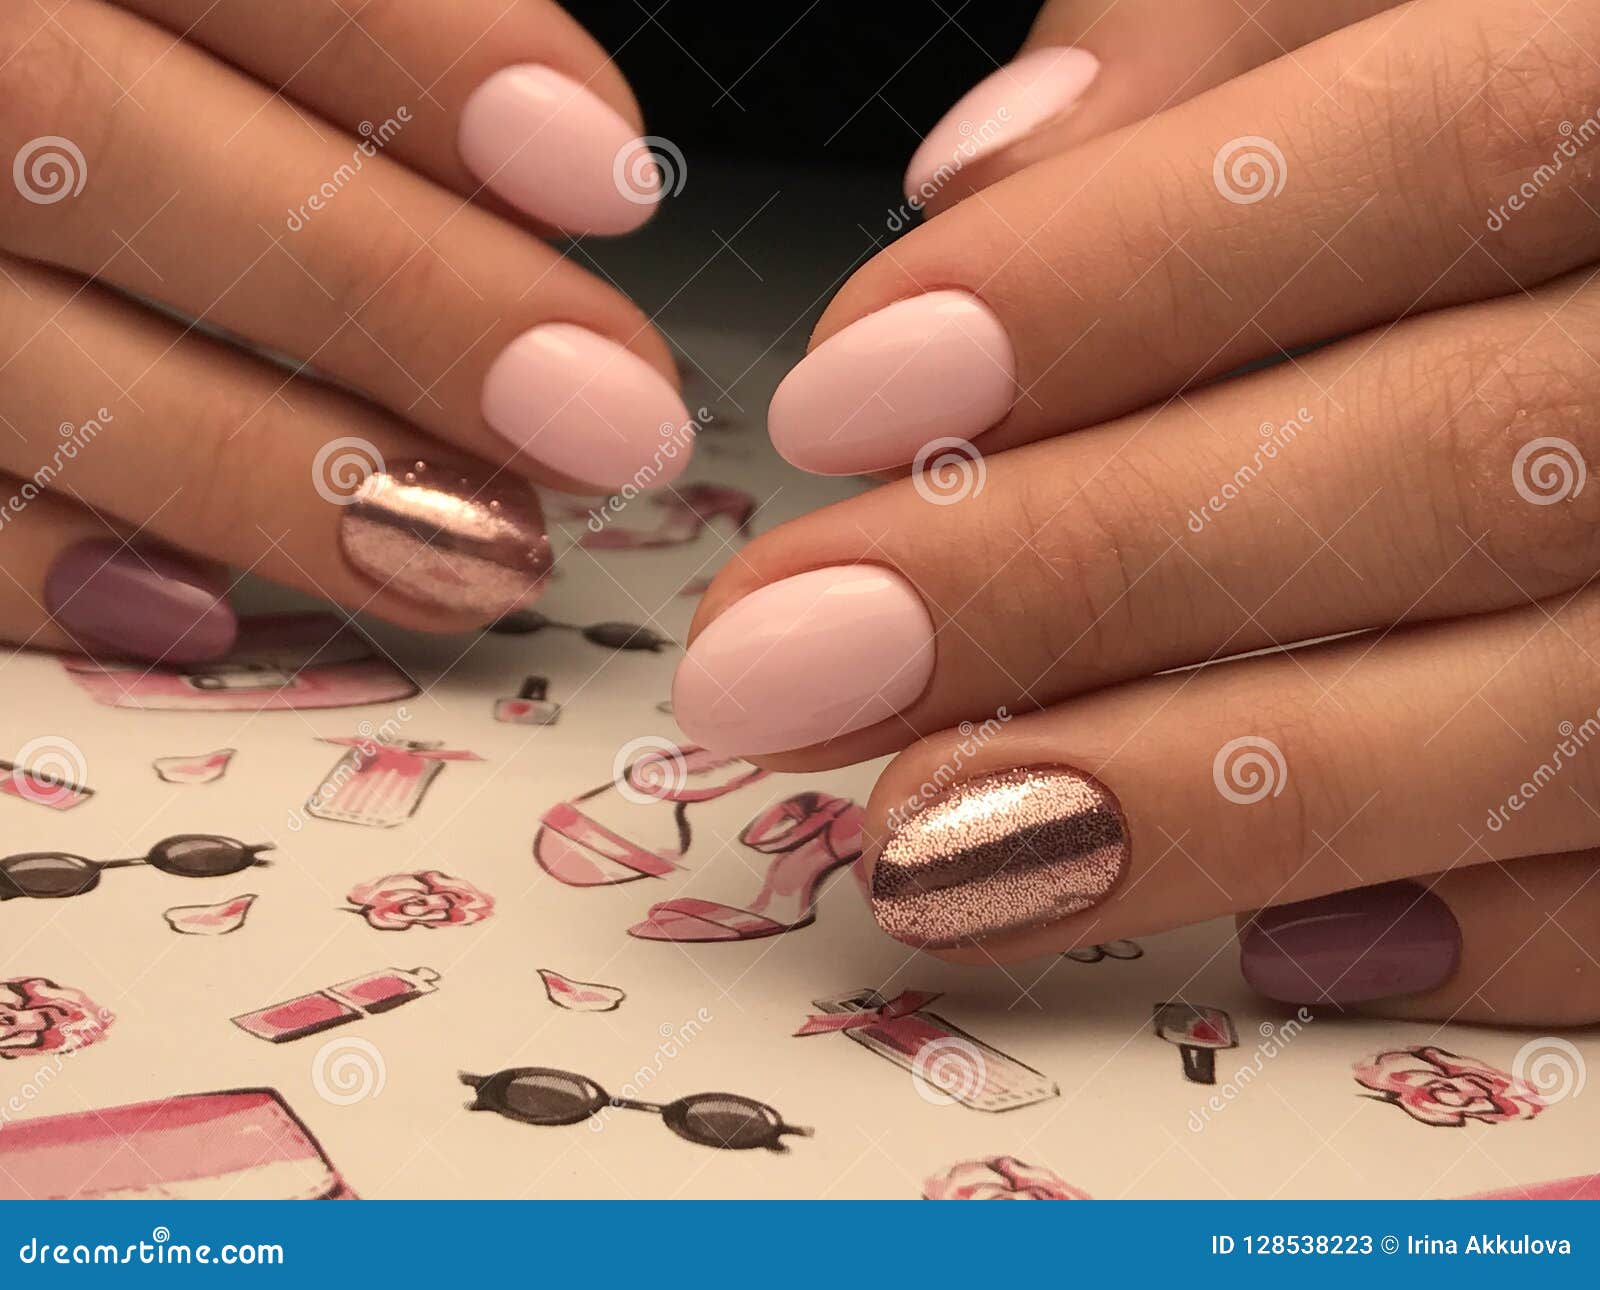 Cute Pink Nails With Gel Polish And Glitter Stock Image Image Of Autumn Style 128538223